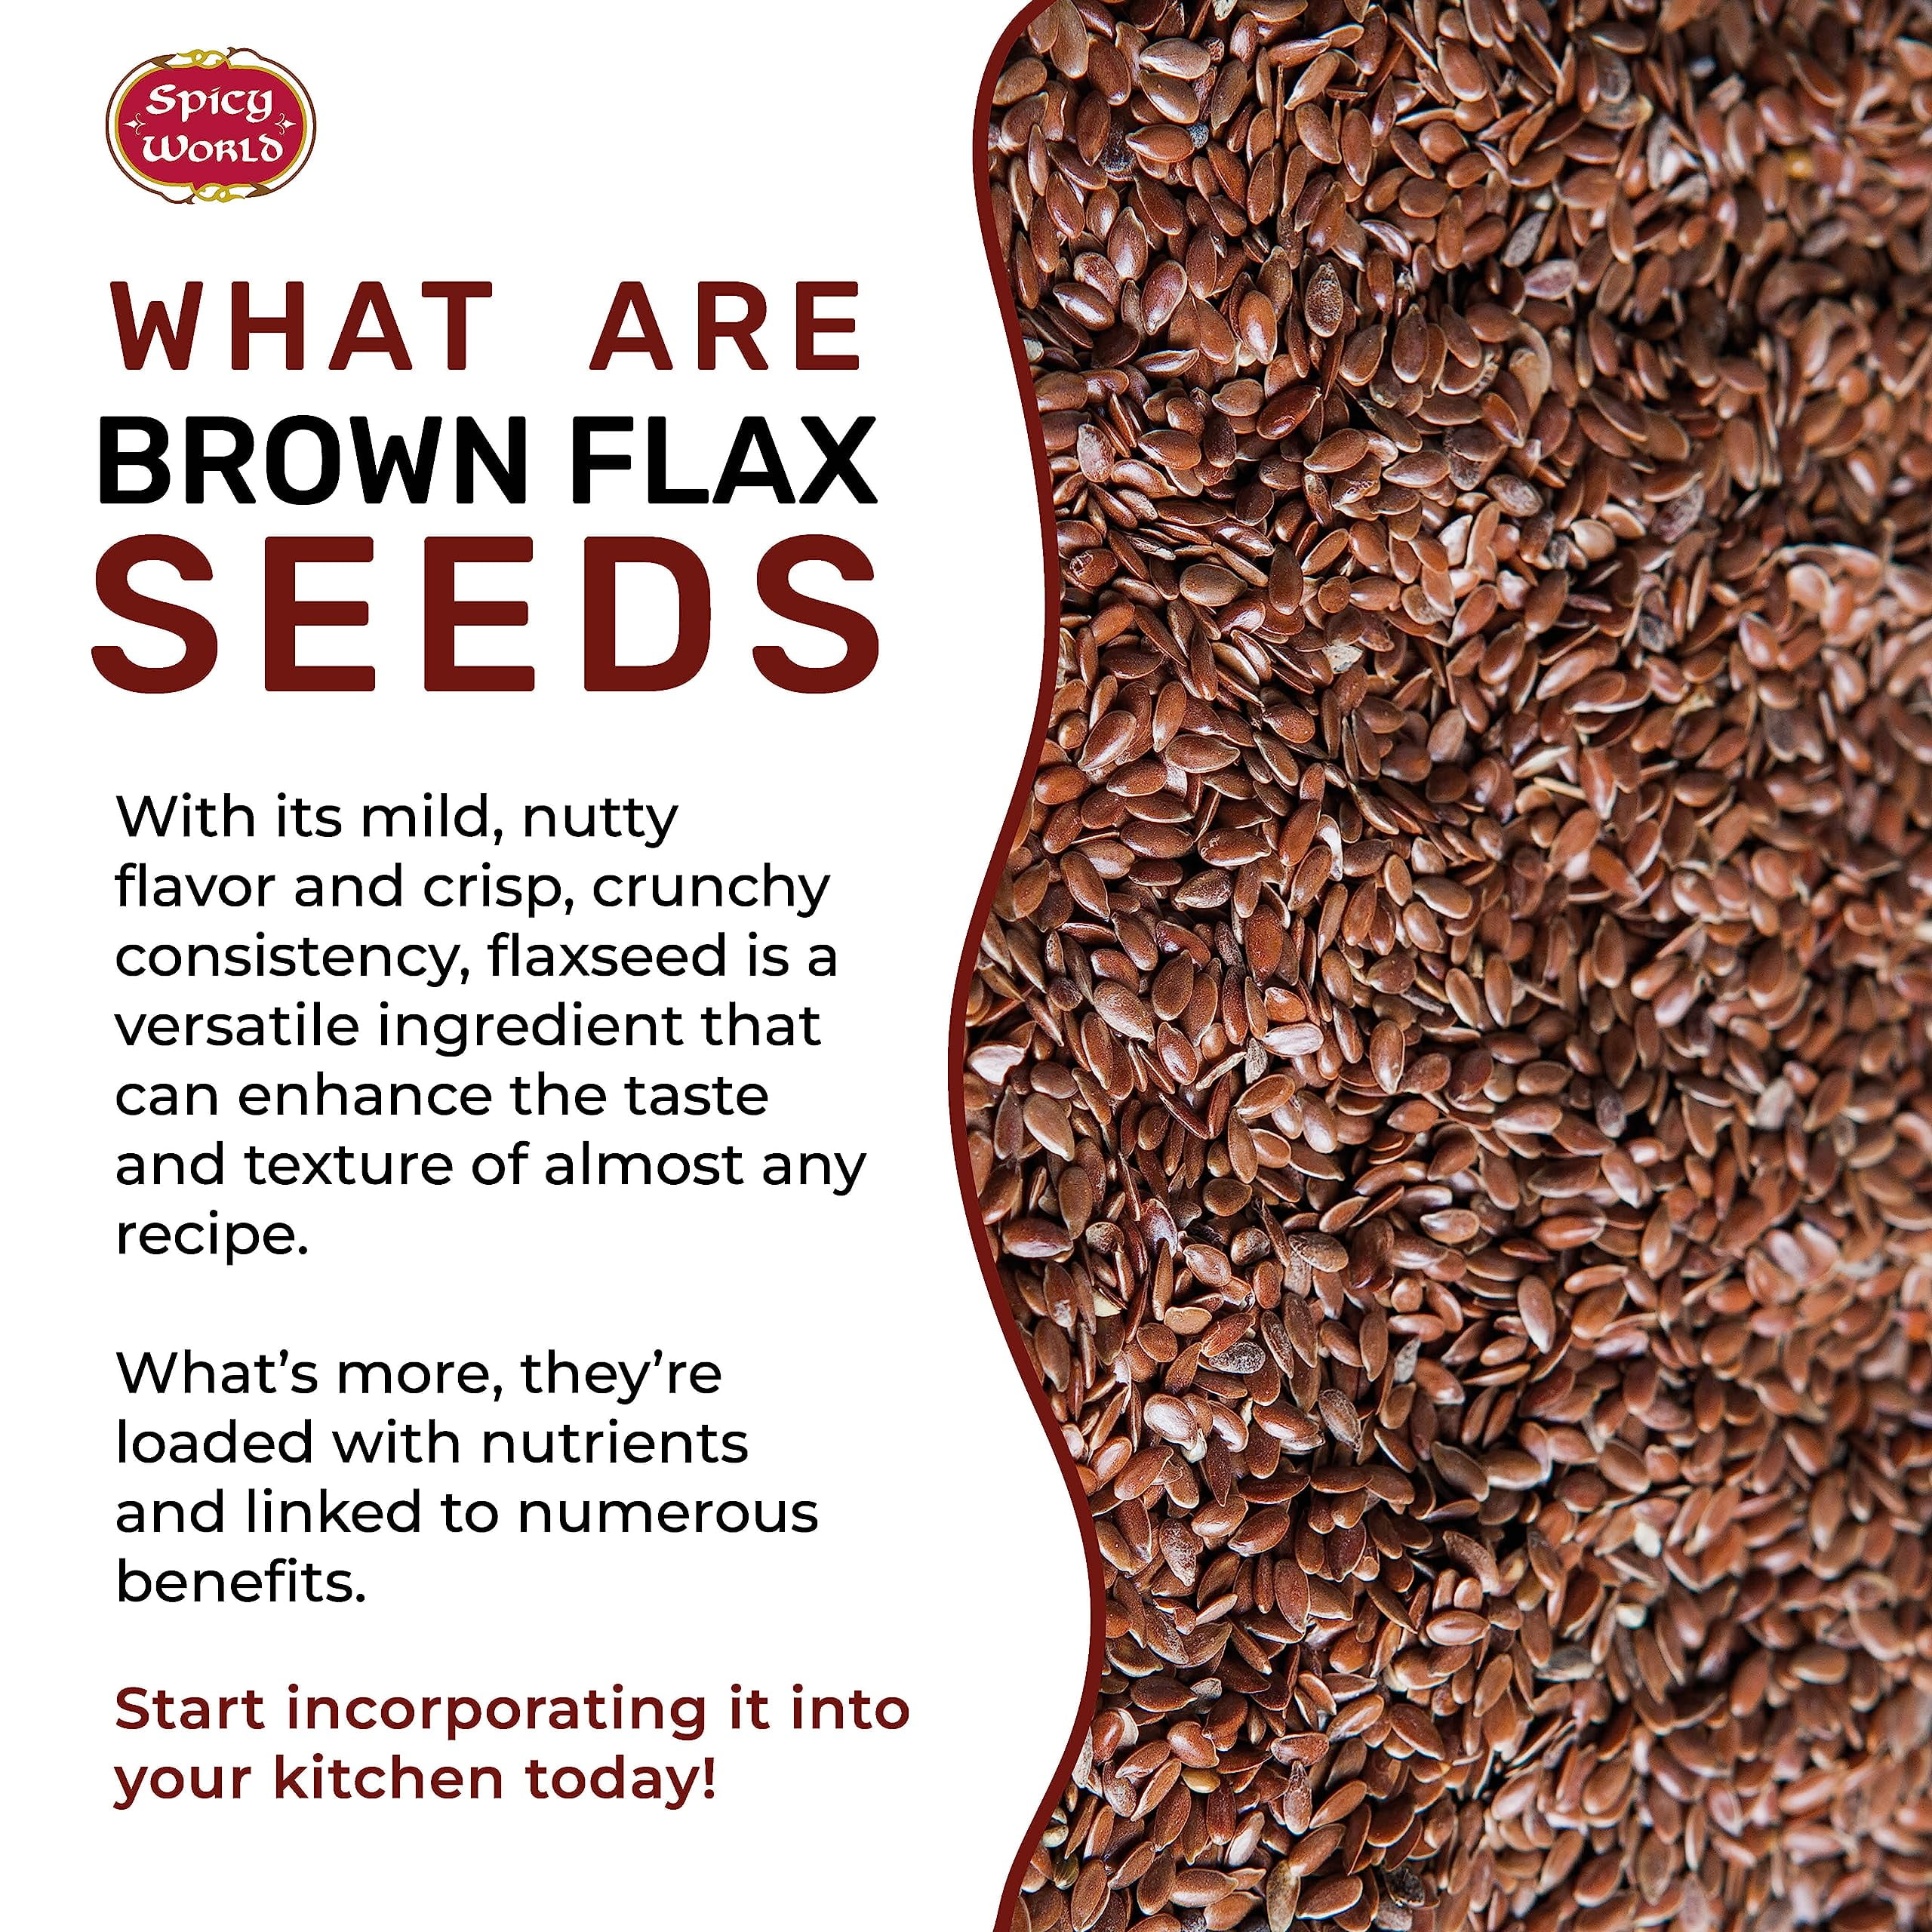  Spicy World Brown Flaxseed, 10 Pound Box : Grocery & Gourmet  Food